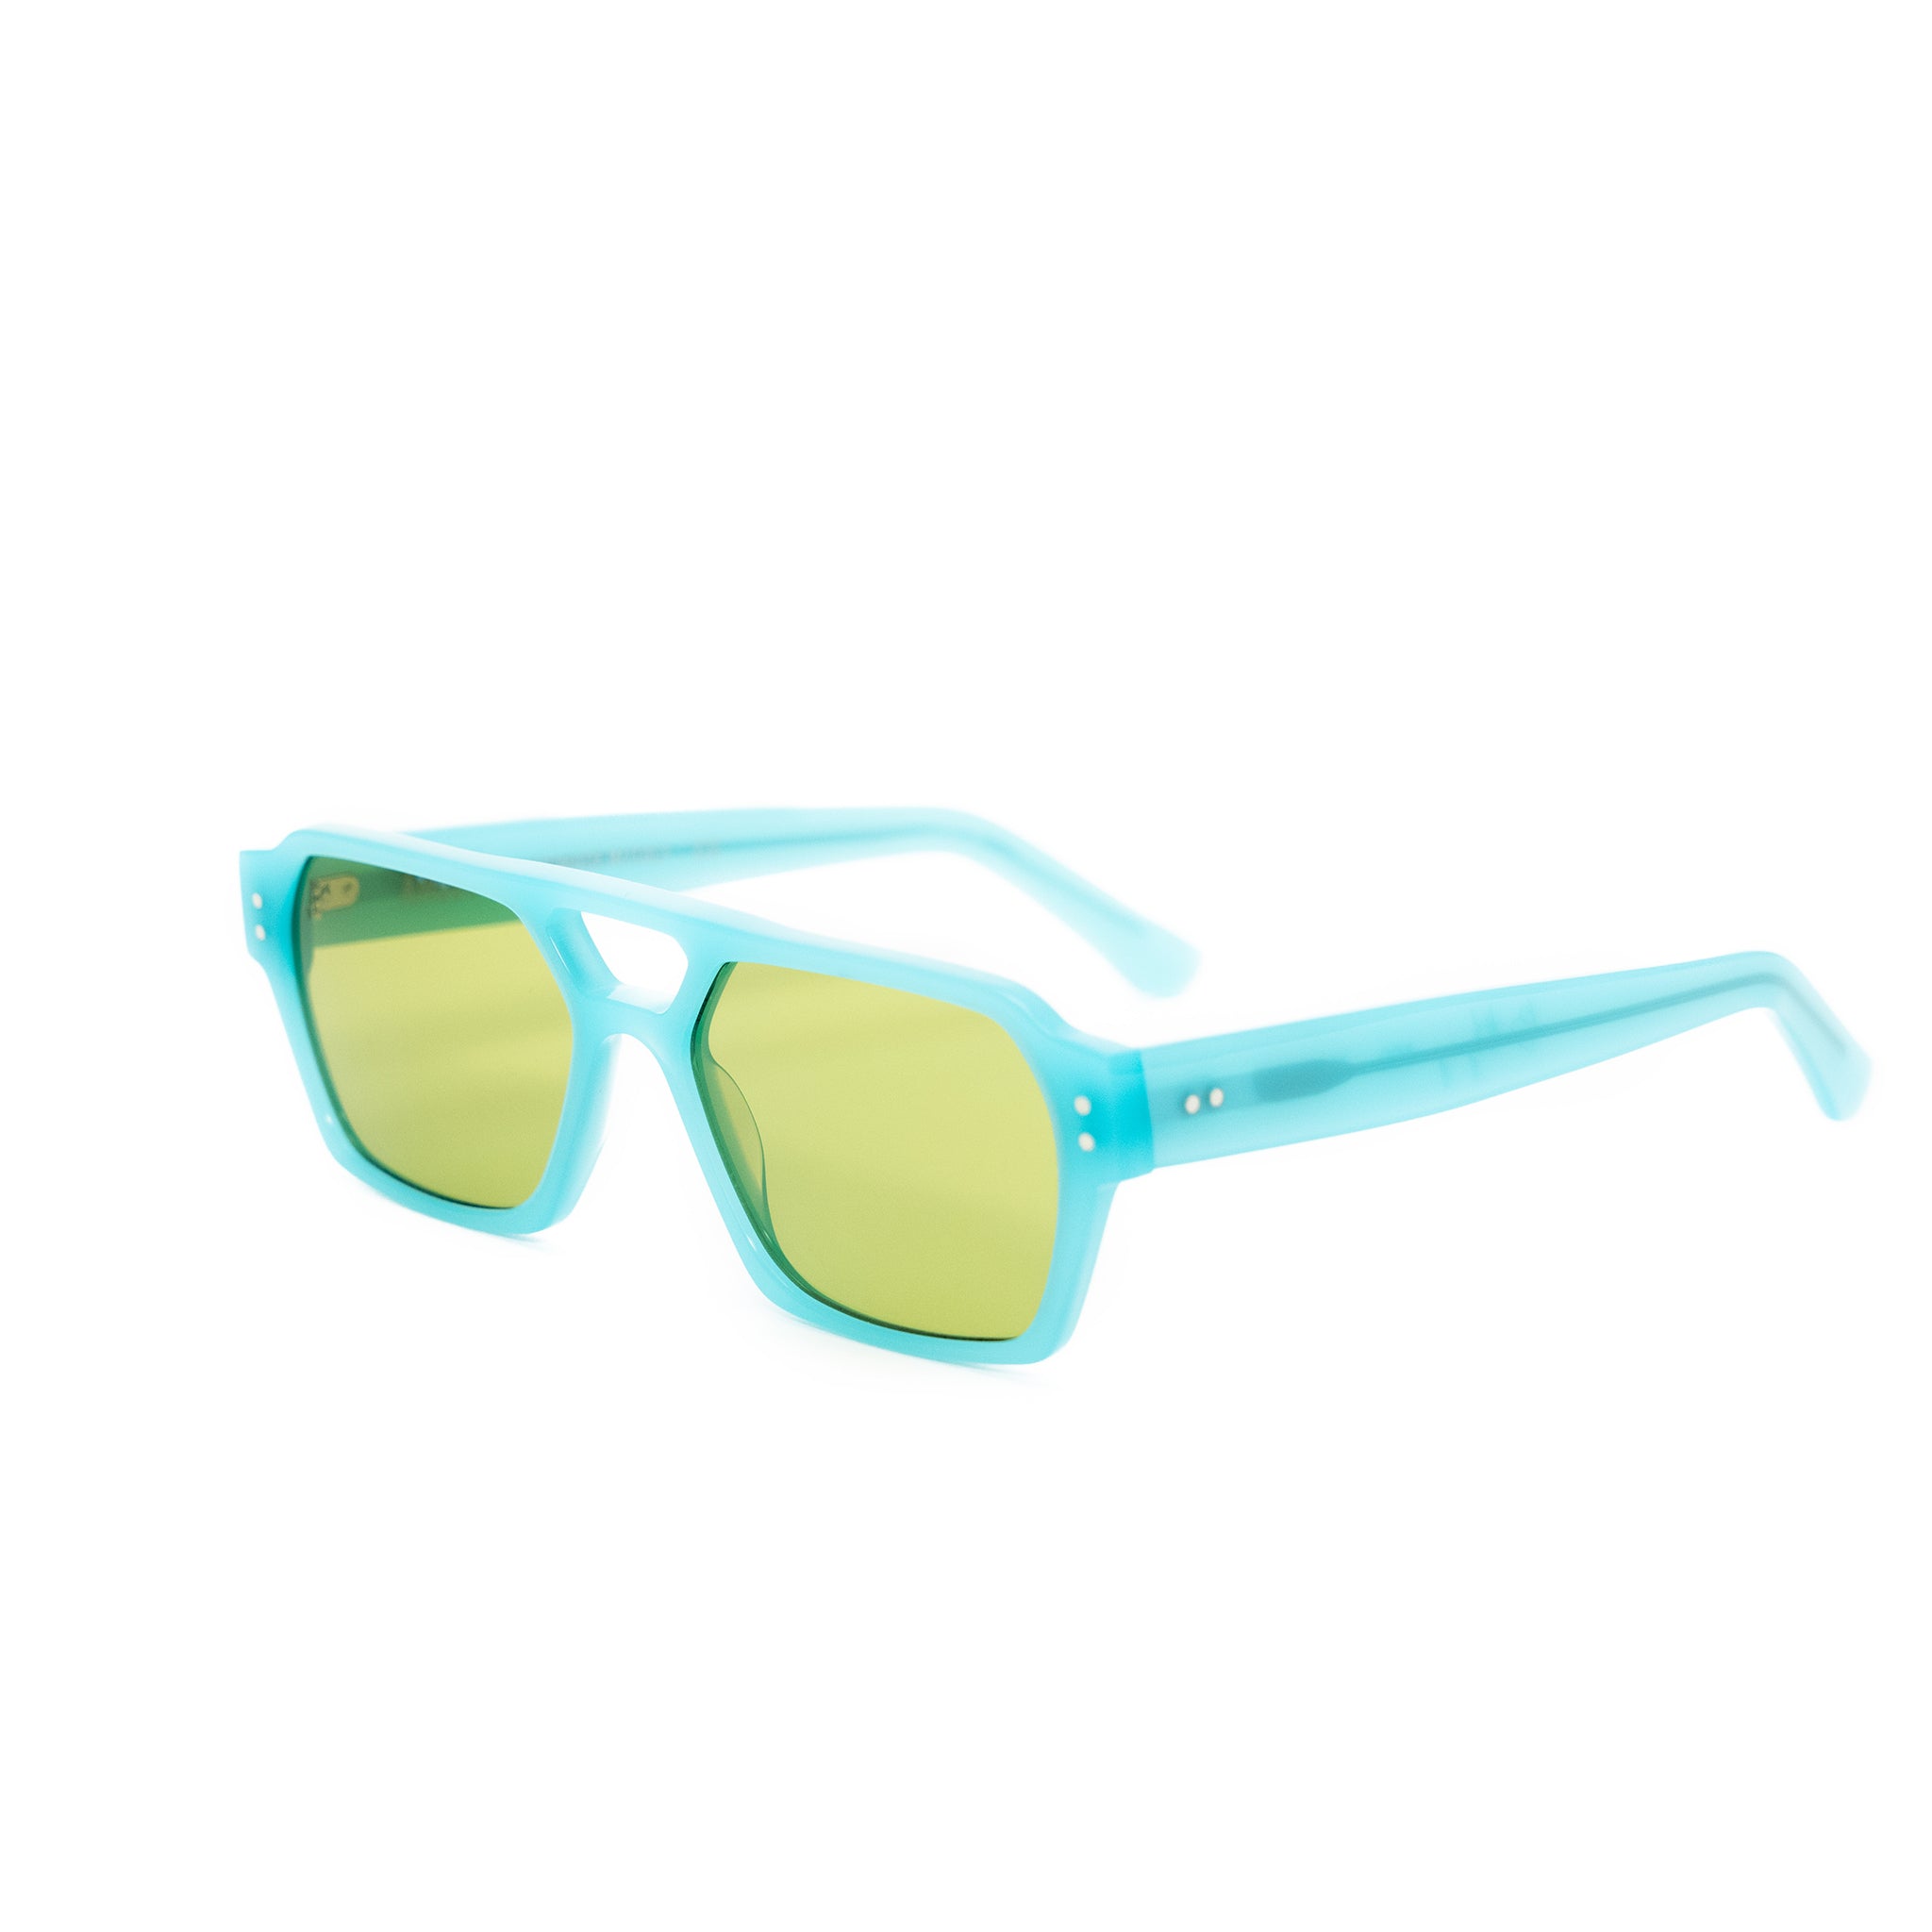 Ameos Identity collection Ego model. Opal blue frames with light green lenses. Side view. Genderless, gender neutral eyewear